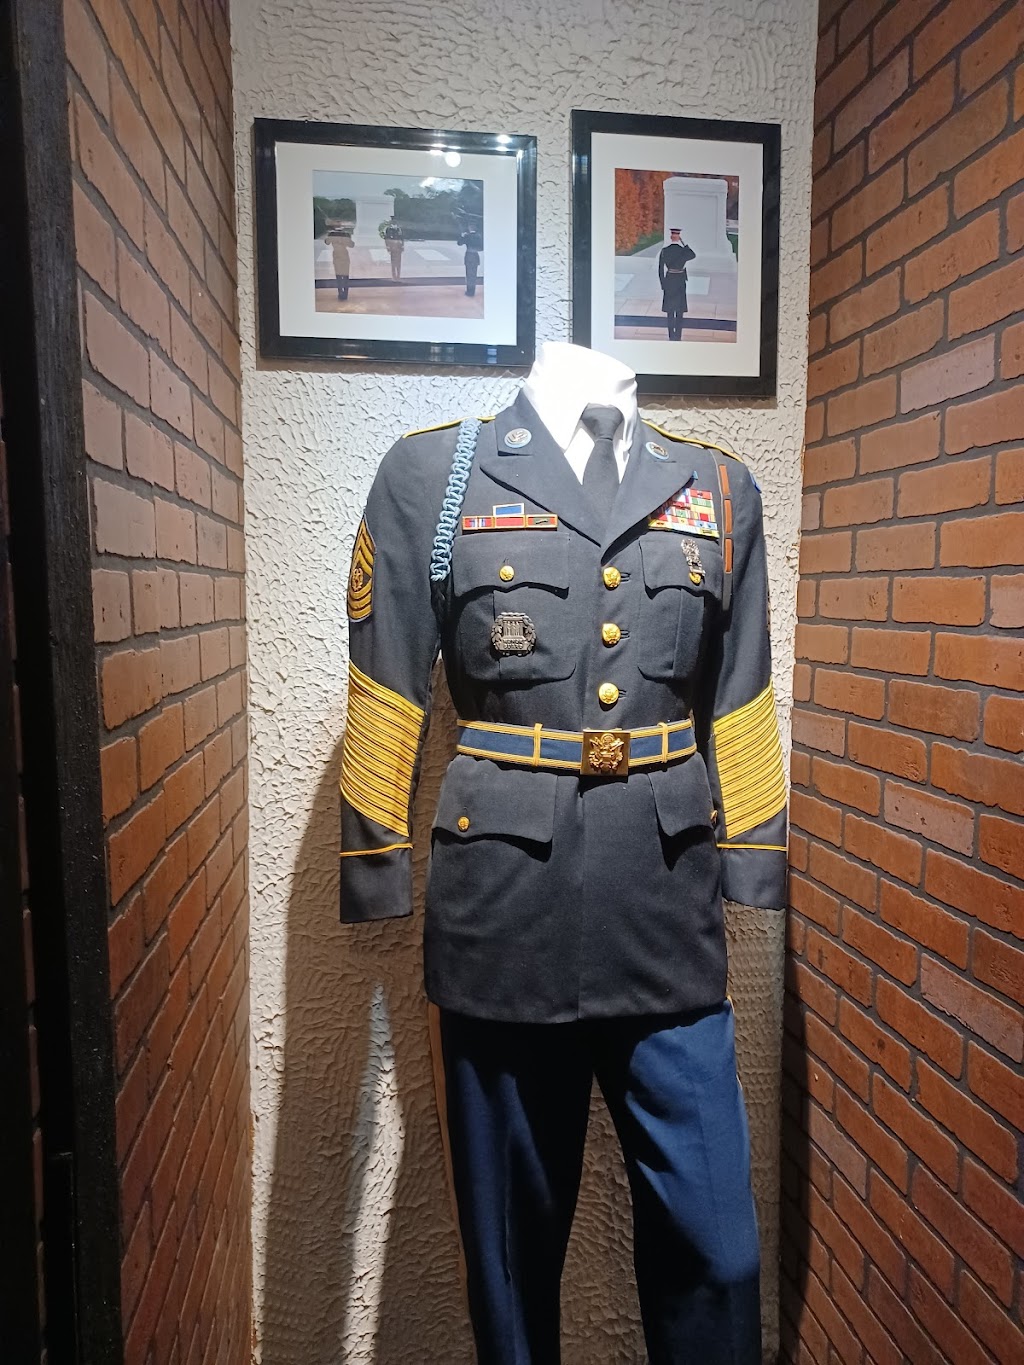 Military Heritage Collection of North Texas | 20798 Co Rd 590, Nevada, TX 75173 | Phone: (469) 434-0396